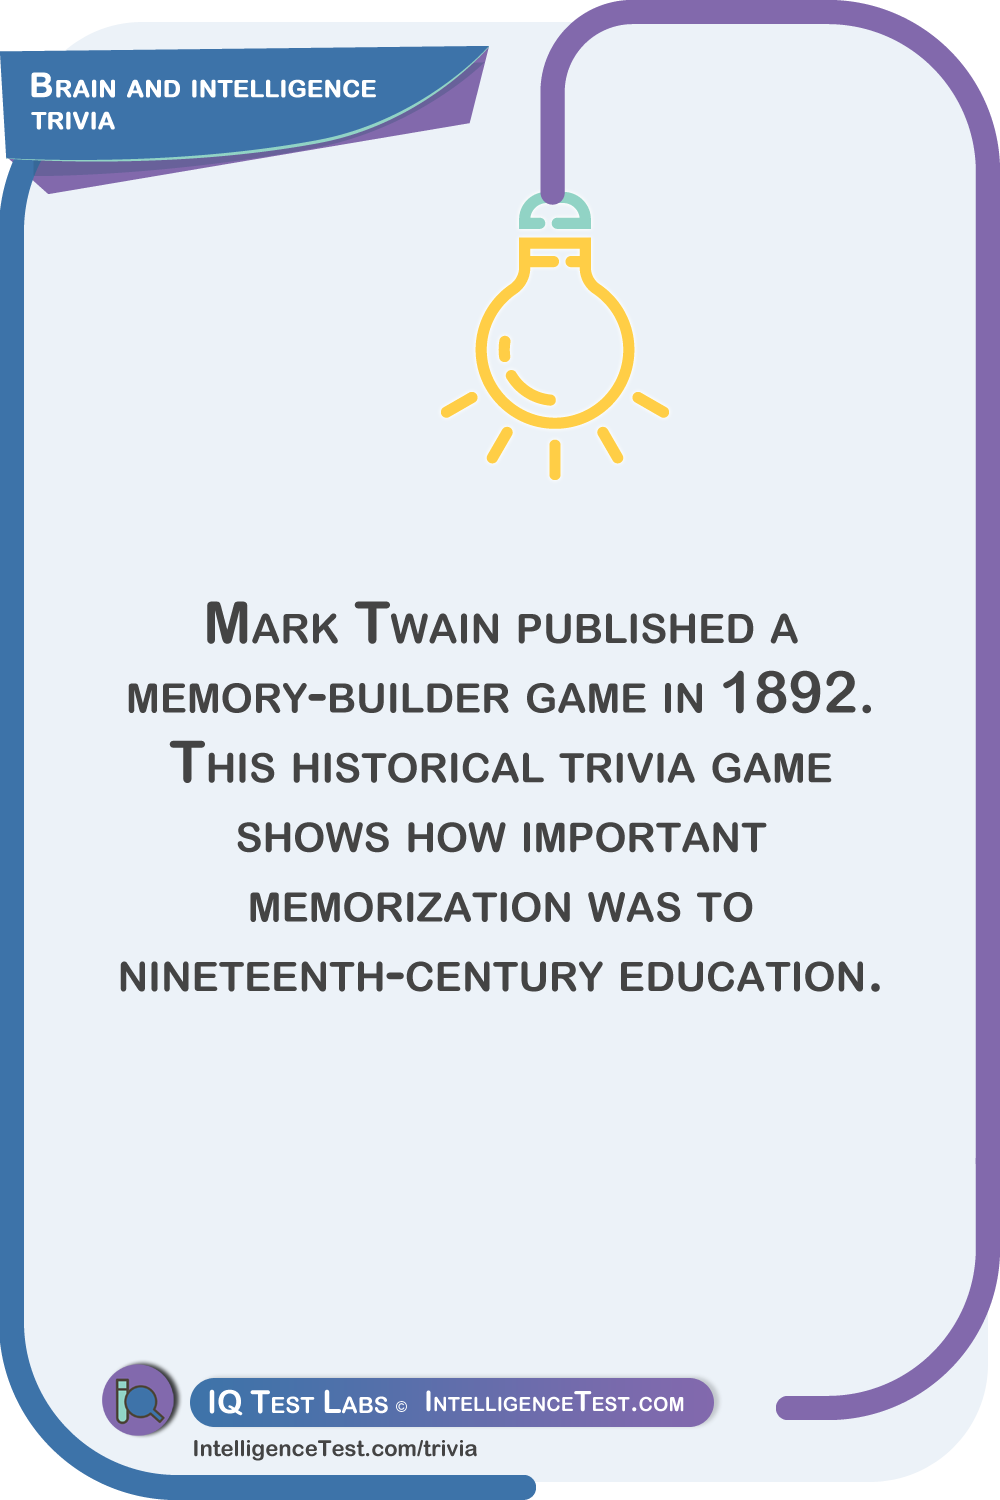 Mark Twain published a memory-builder game in 1892. This historical trivia game shows how important memorization was to nineteenth-century education.